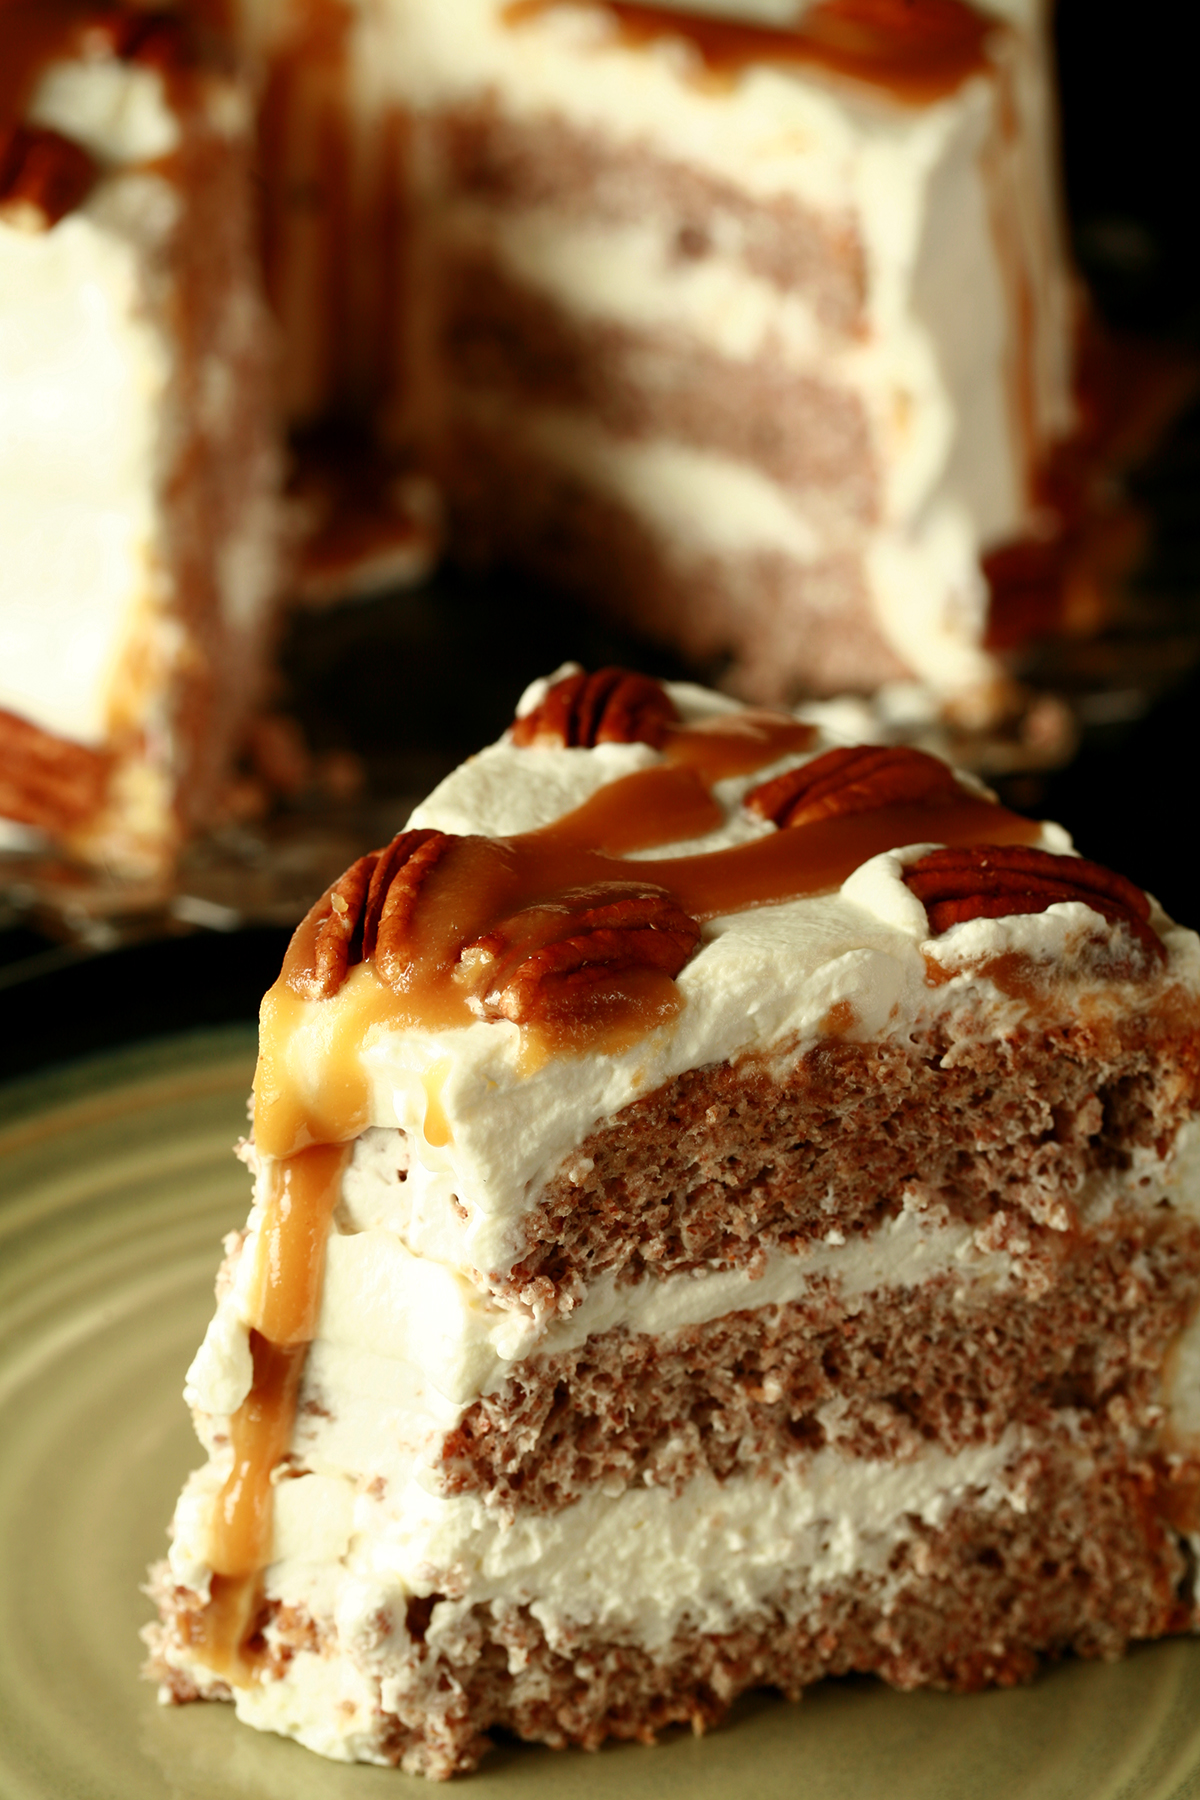 A close up view of a schmoo torte - layers of pecan angel food cake and whipped cream, topped with pecans and with caramel sauce drizzled all over it!